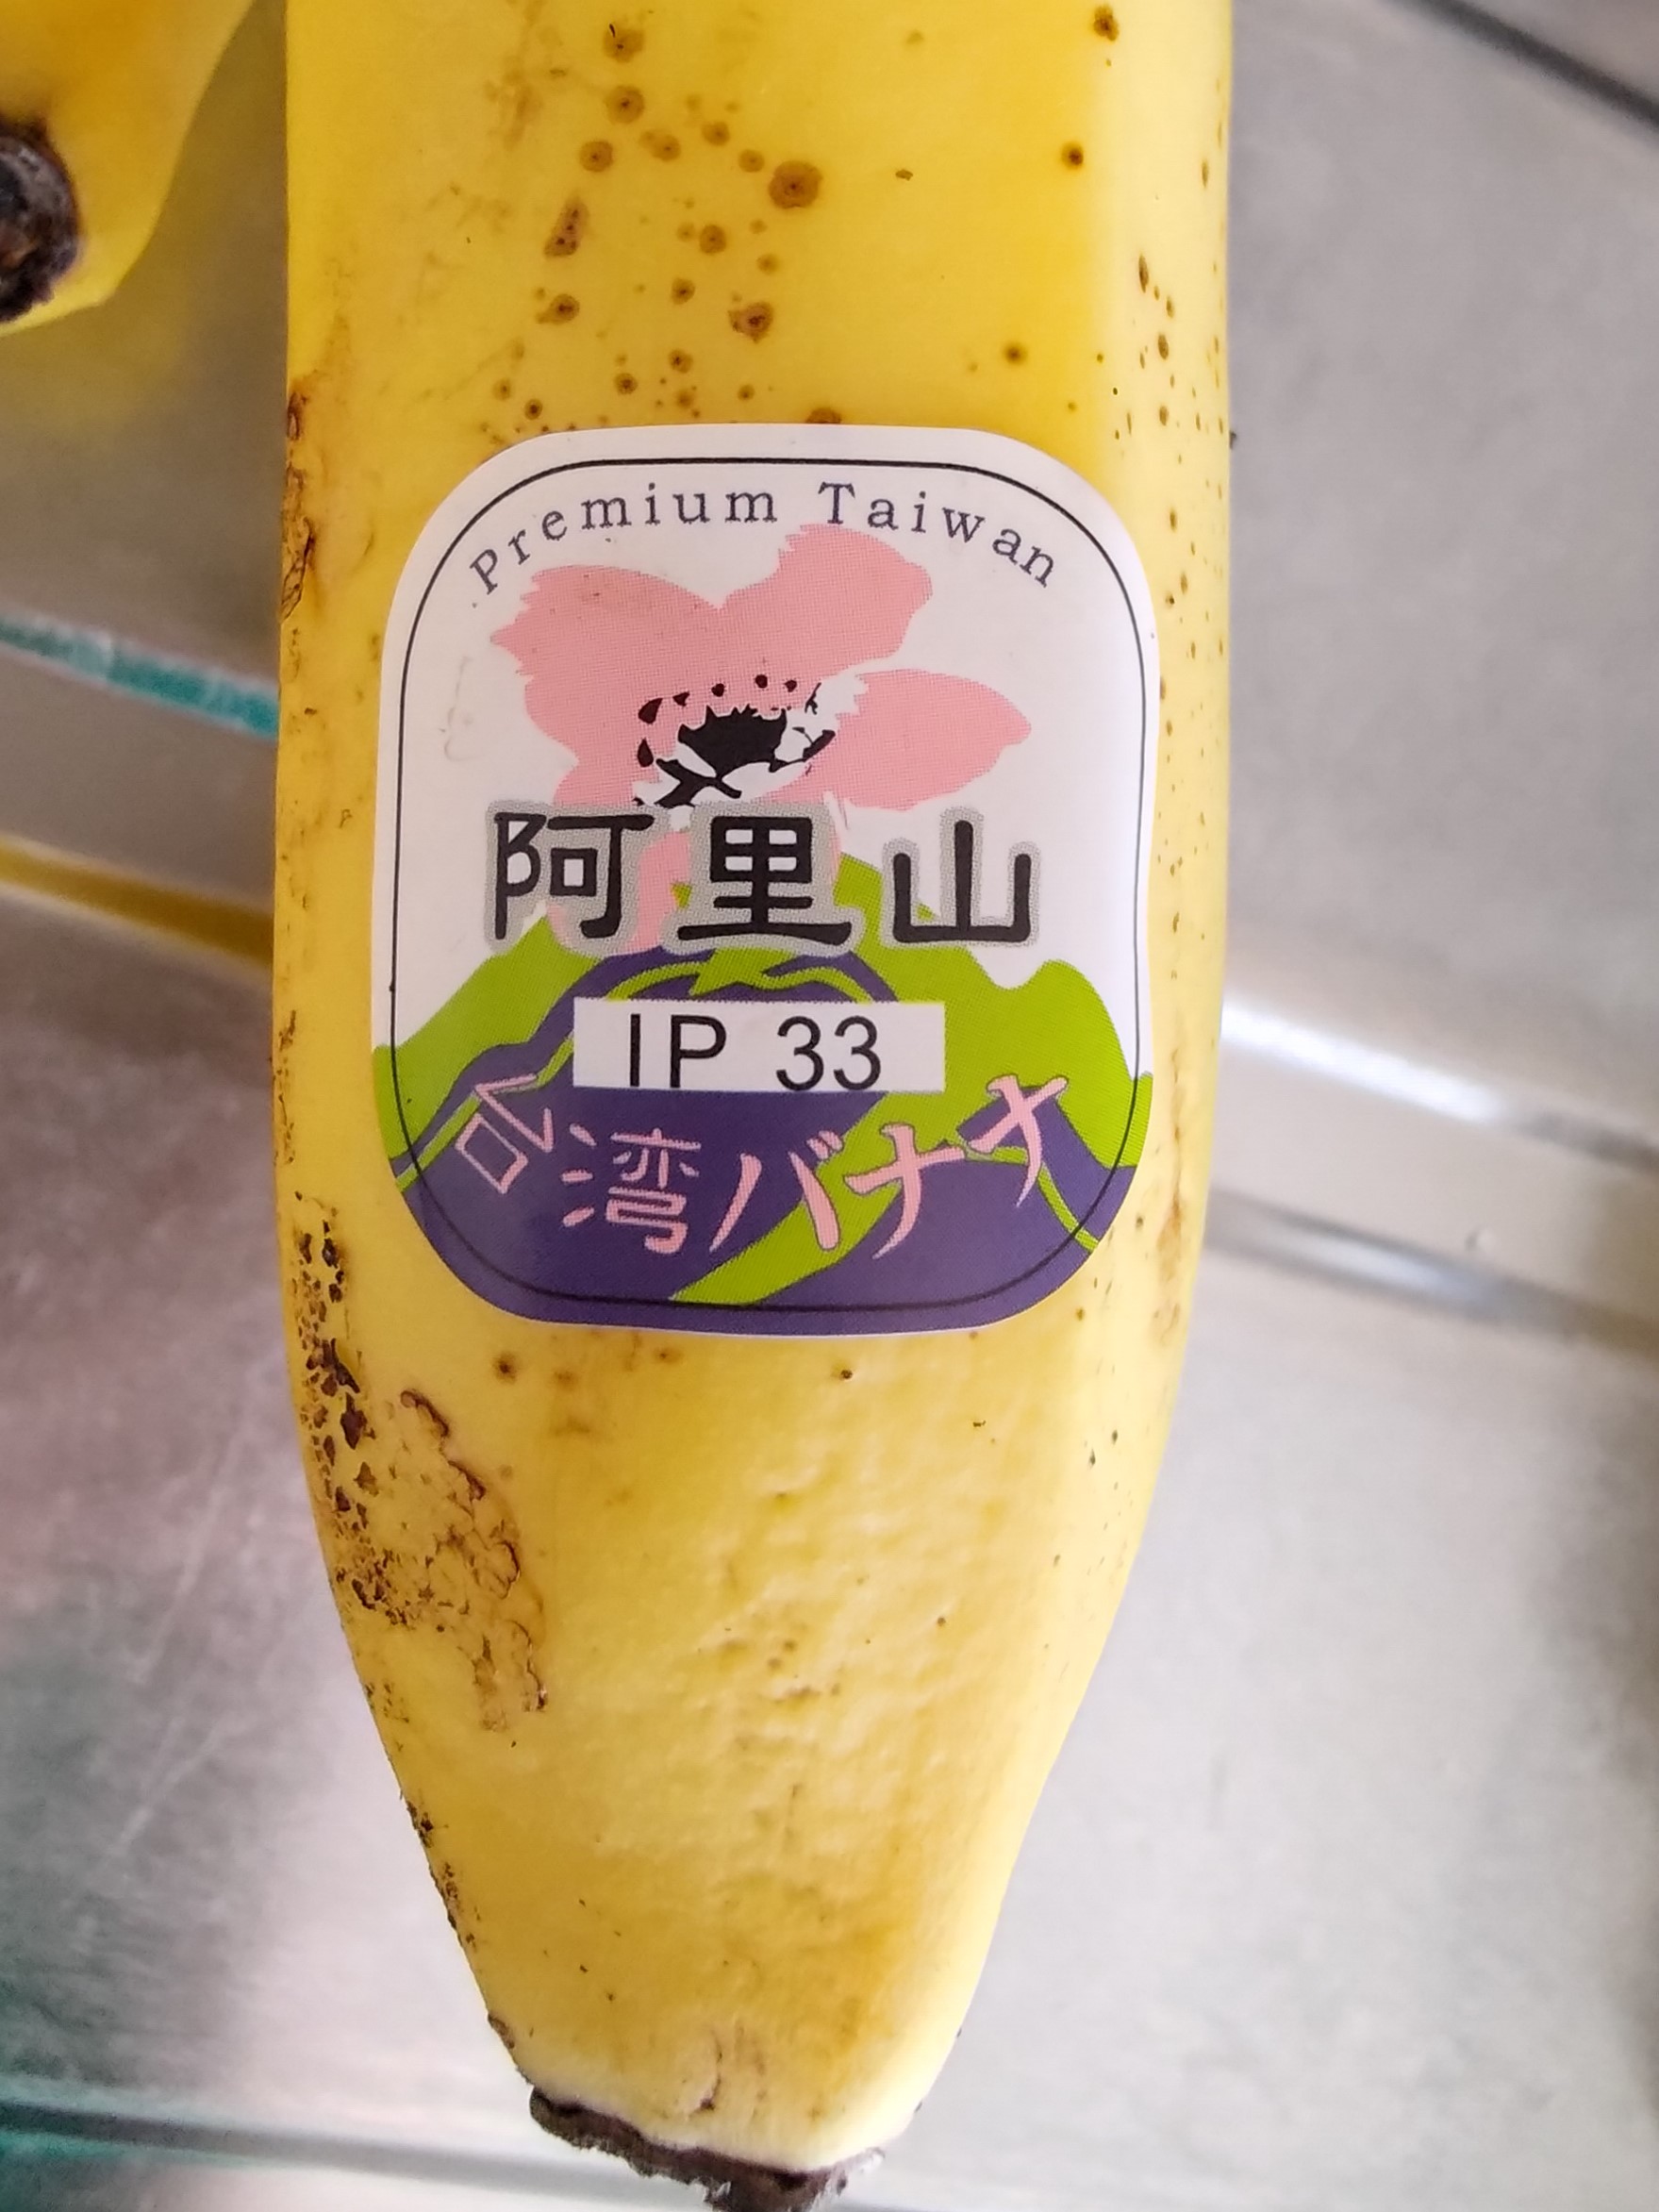 Bananas recommended by Ms. Jo